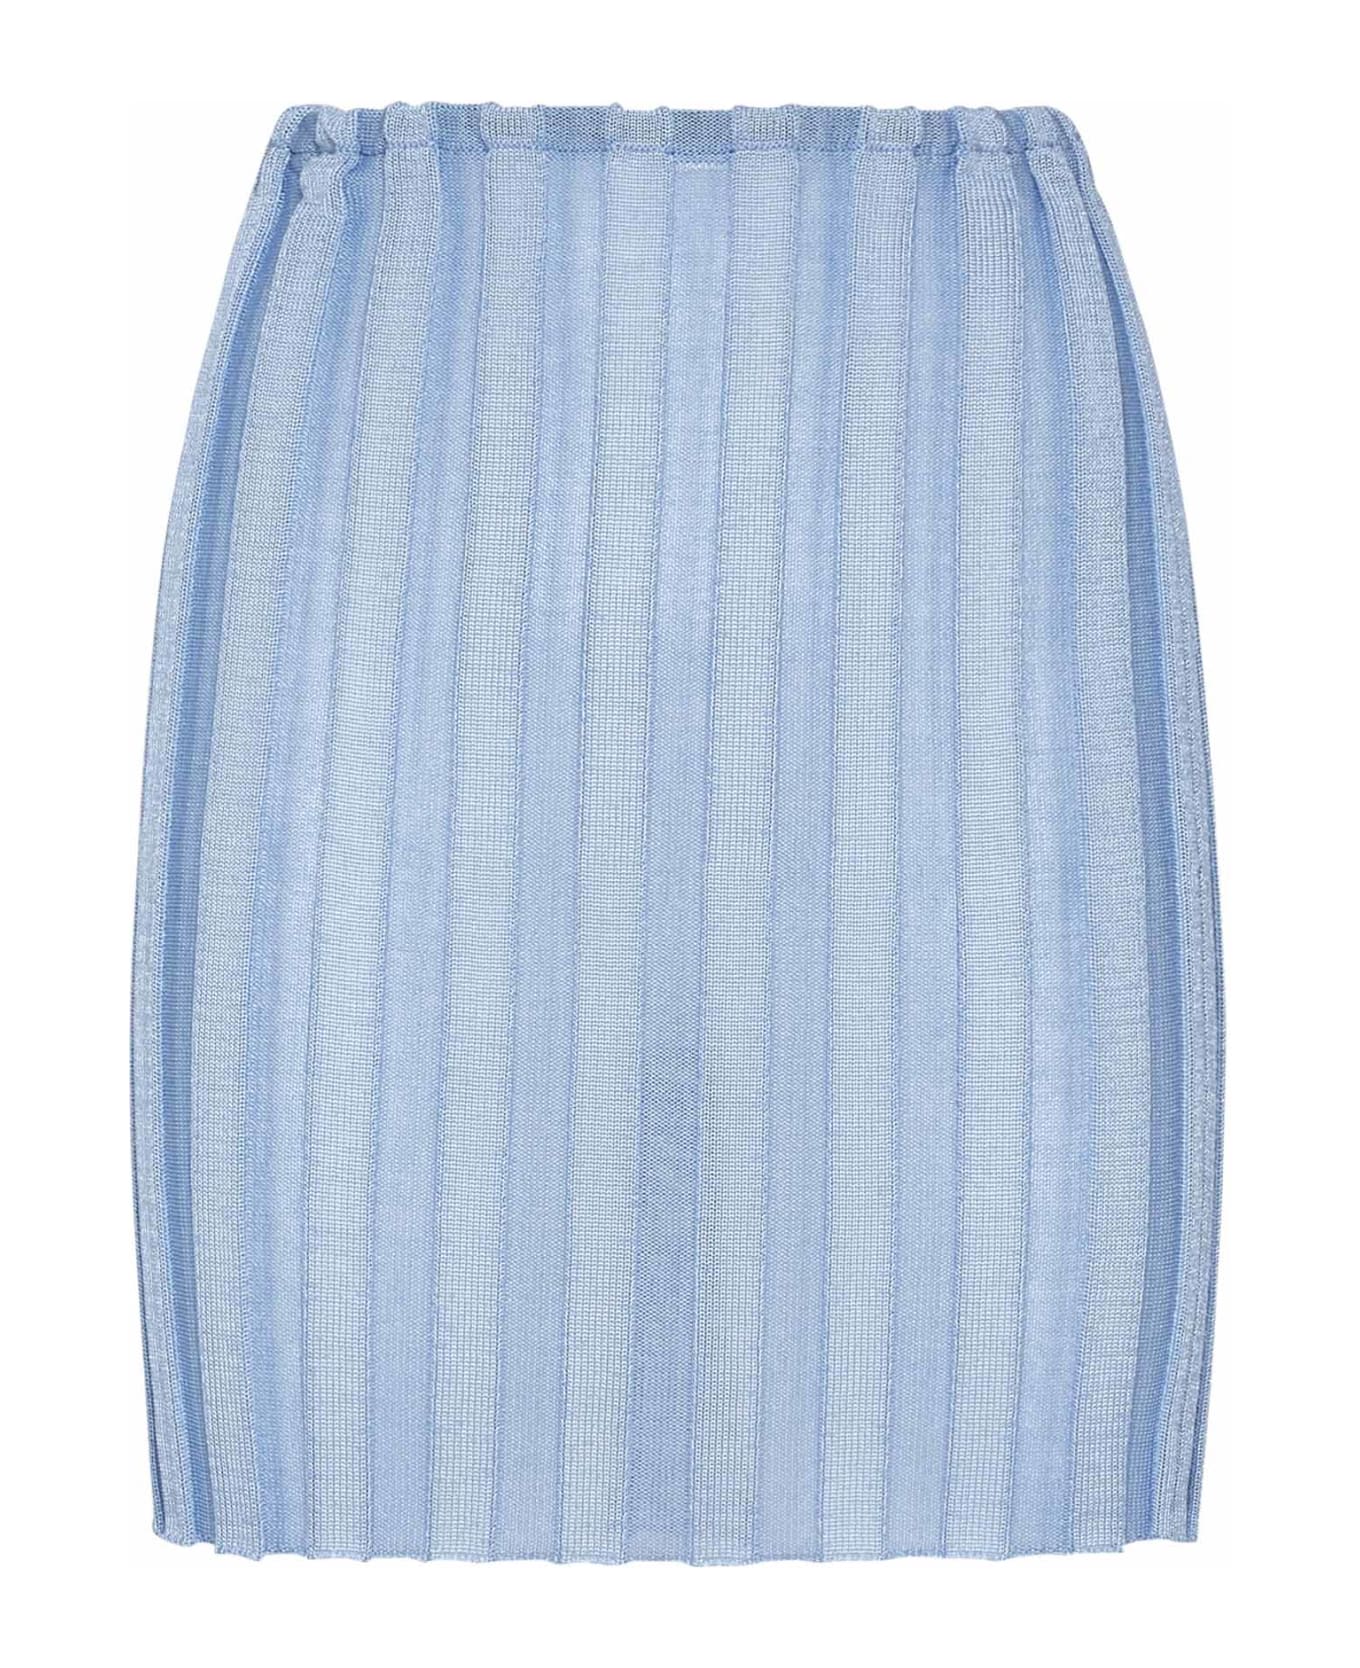 A. Roege Hove Skirt - Icy blue